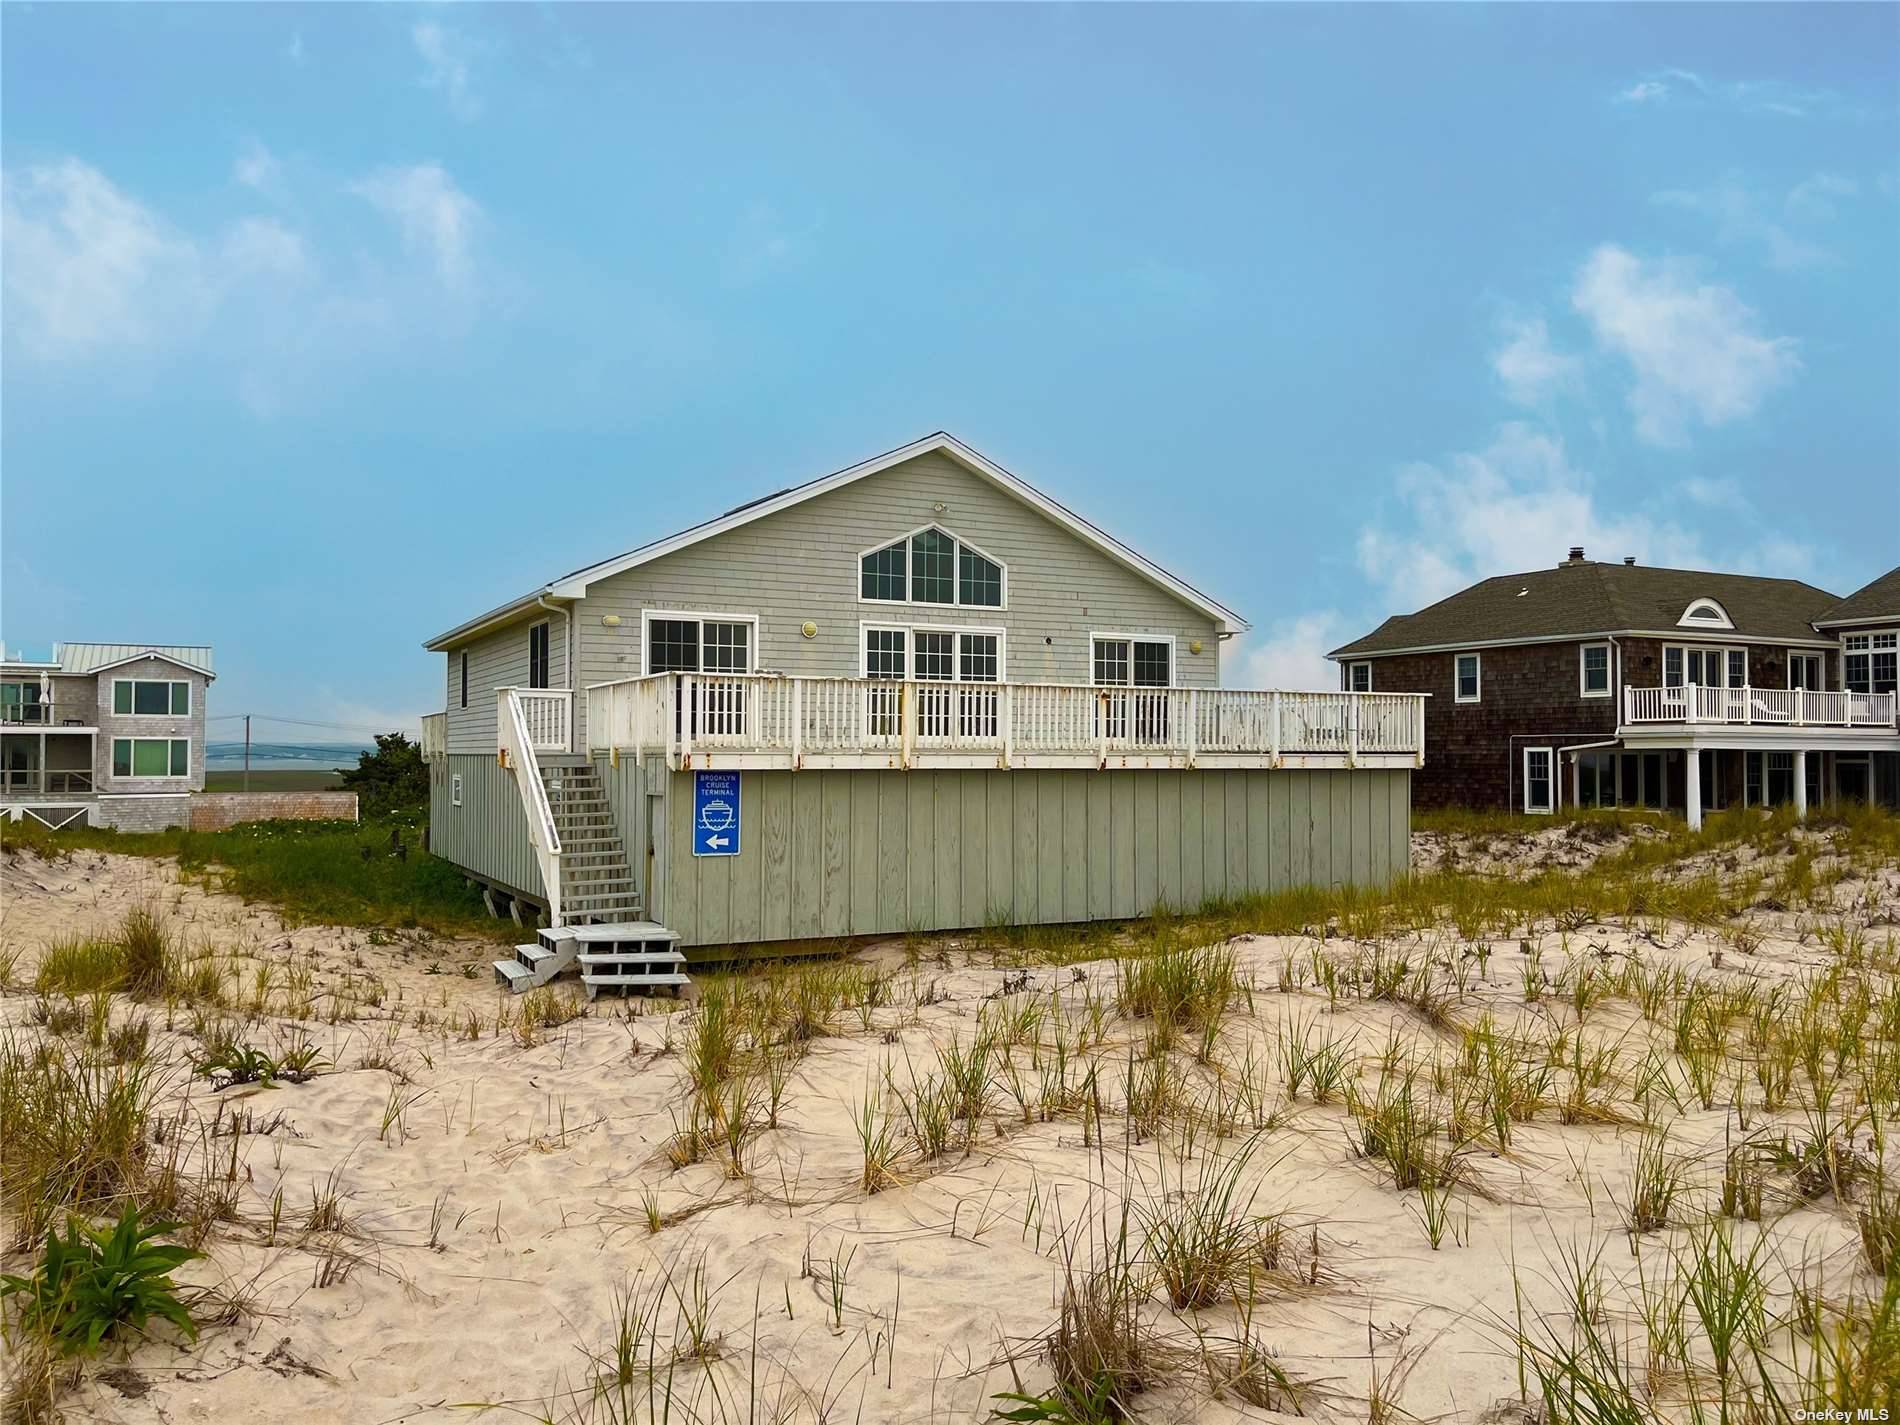 Welcome to the beach ! Take some time to enjoy the summer on the ocean in this lovely beachfront home.